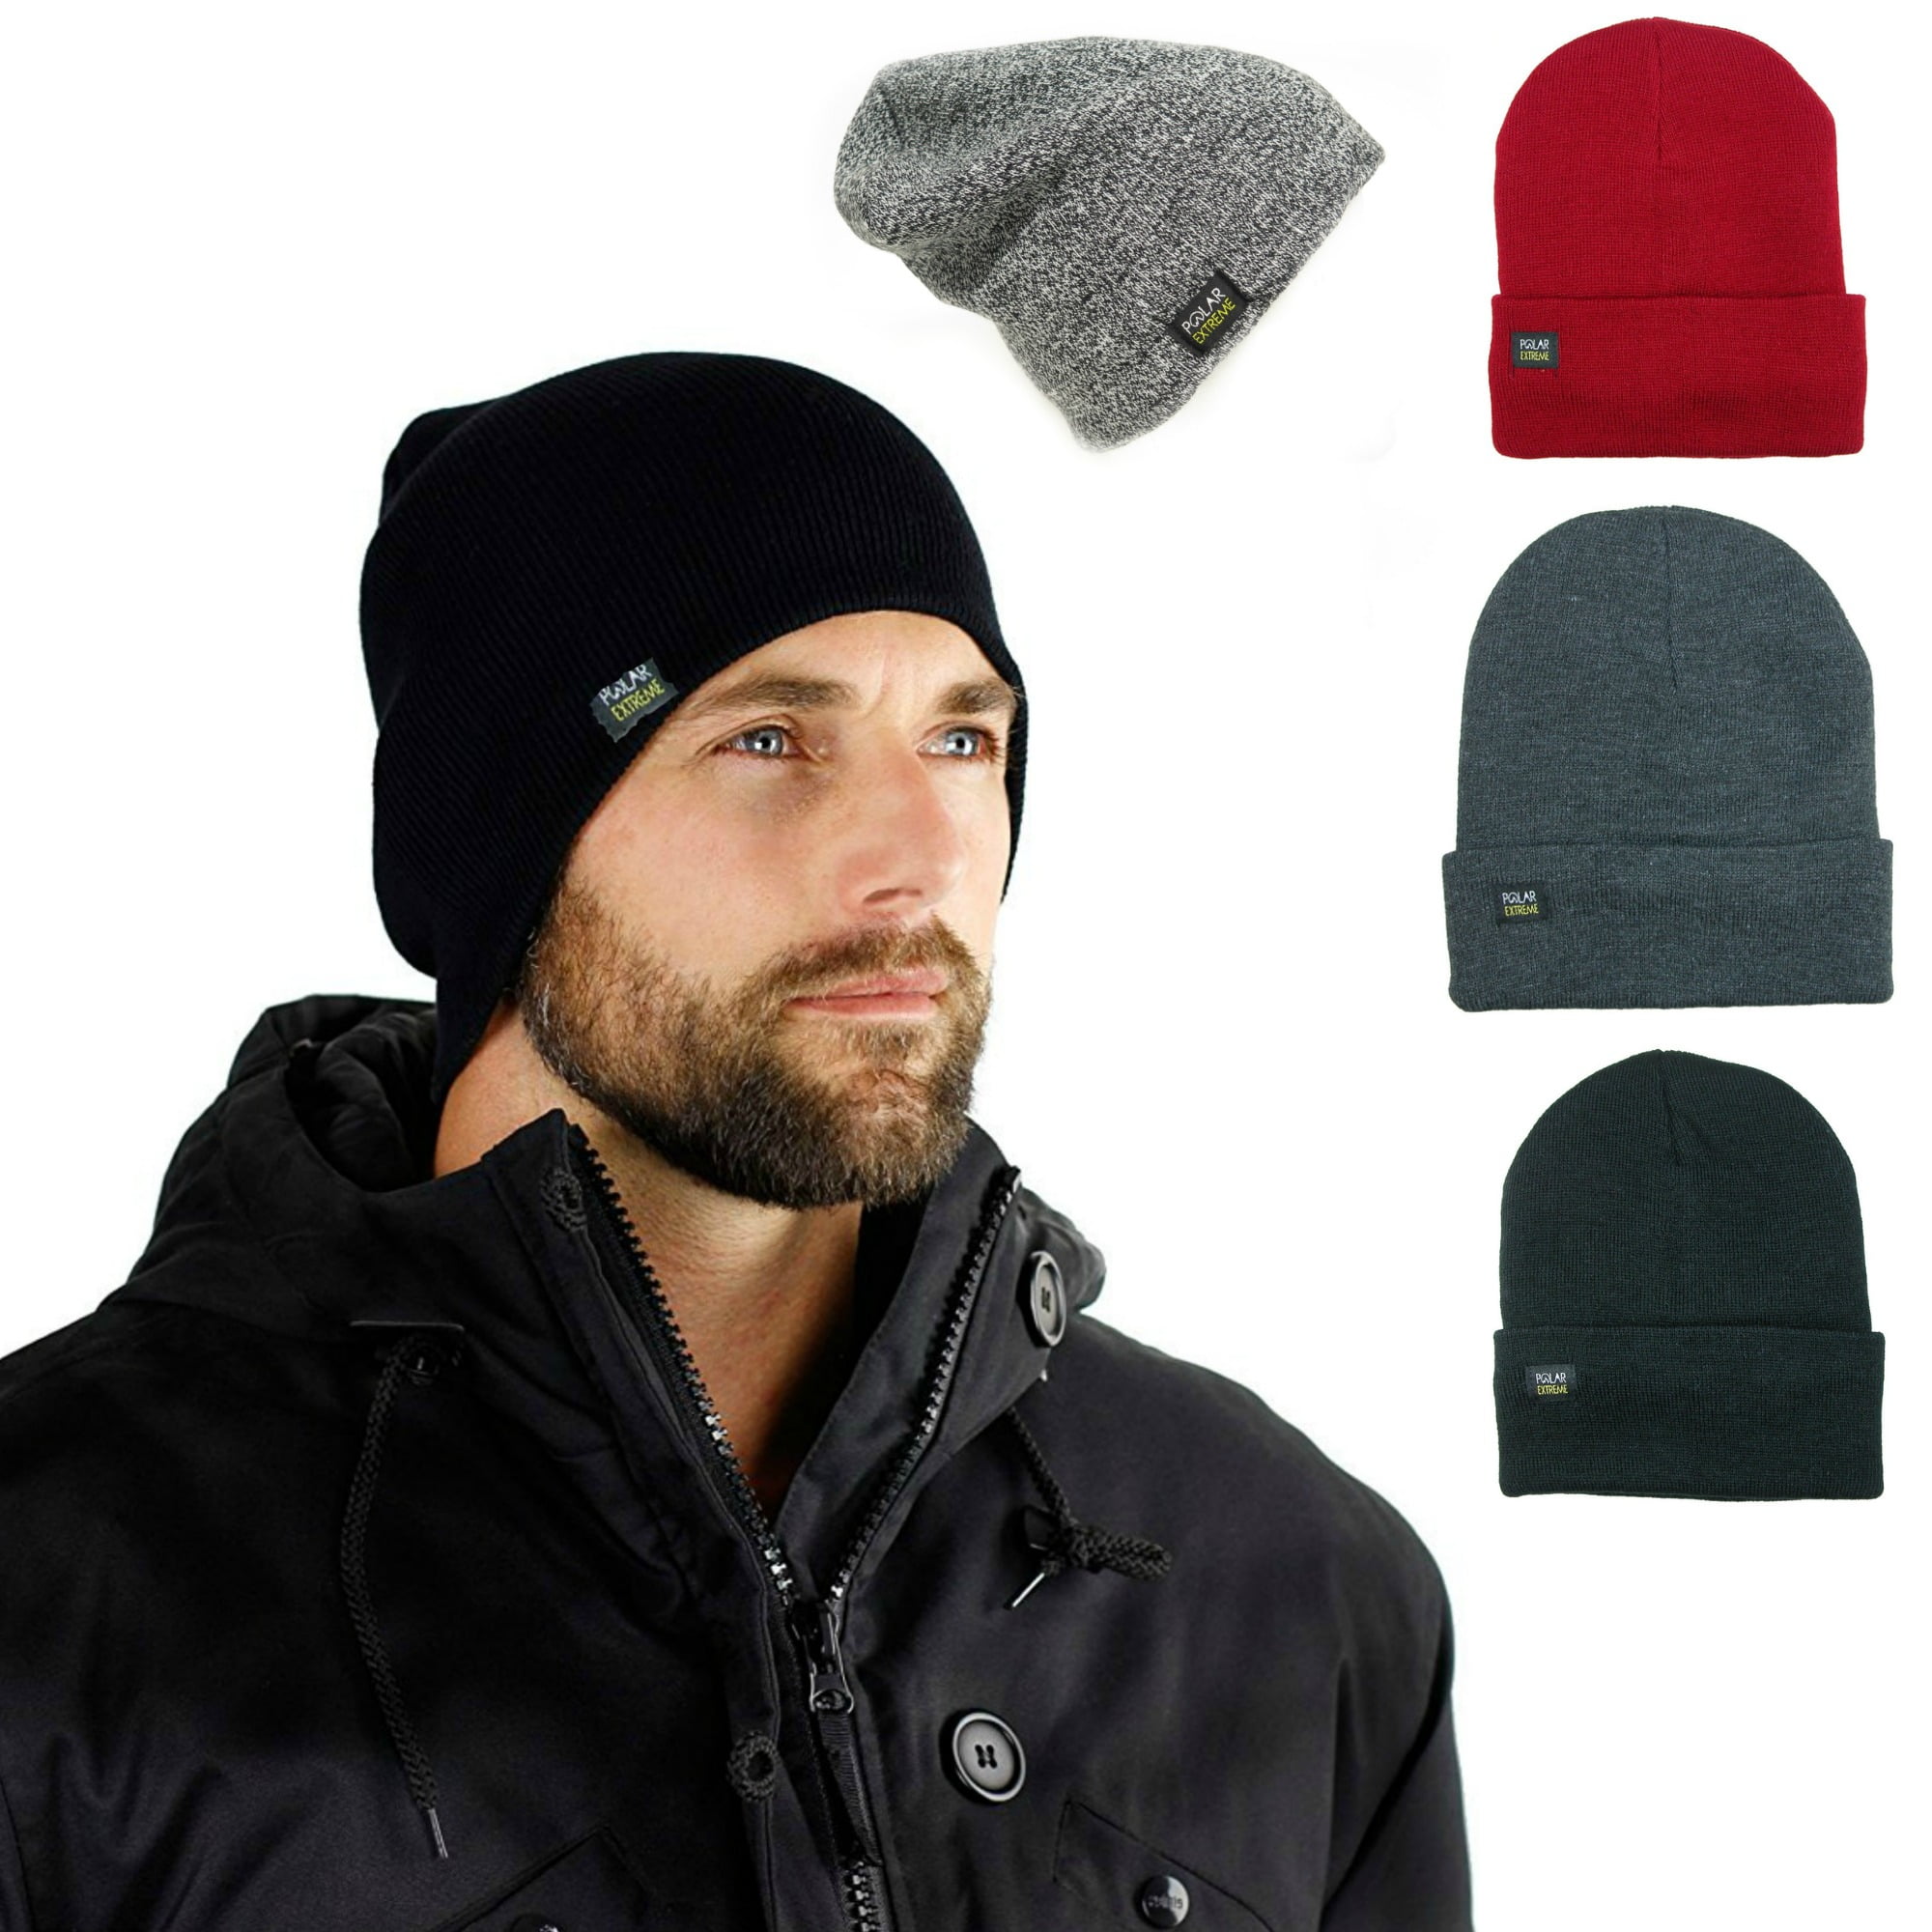 Men's Thermal Insulated Winter Beanie Warm Cap Fleece Lined Knitted Black Hat 